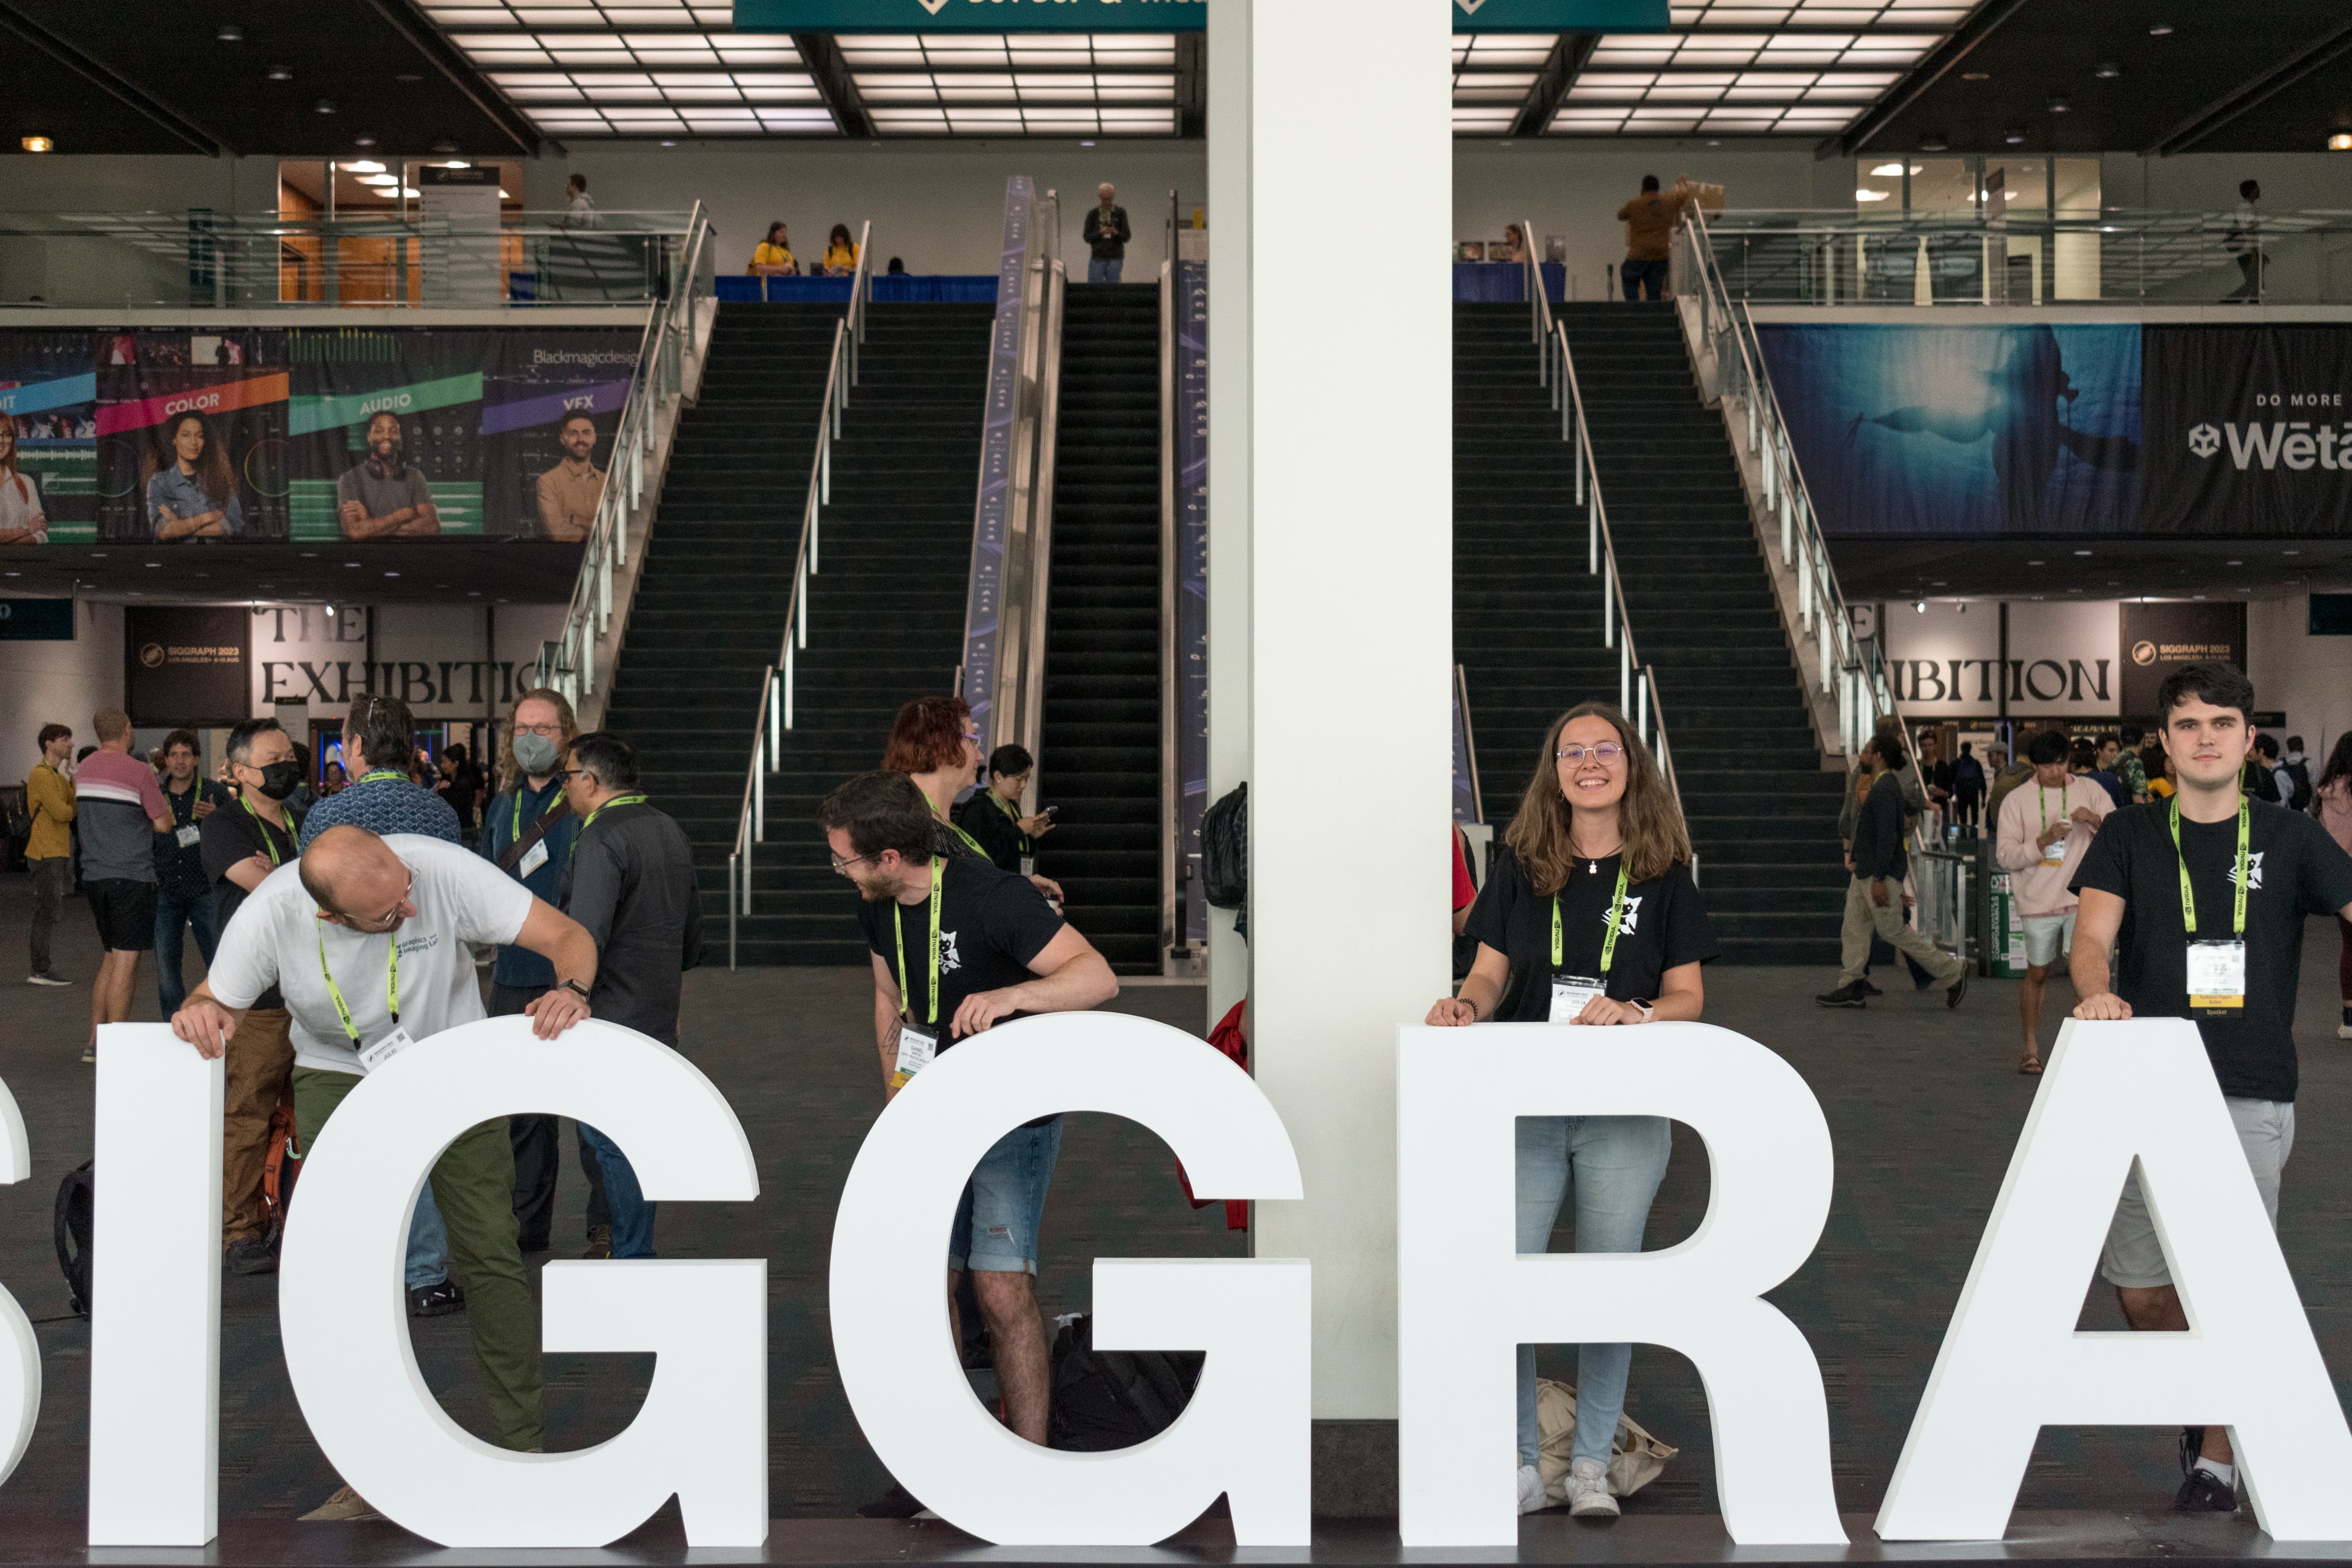 Our colleagues in the SIGGRAPH 23